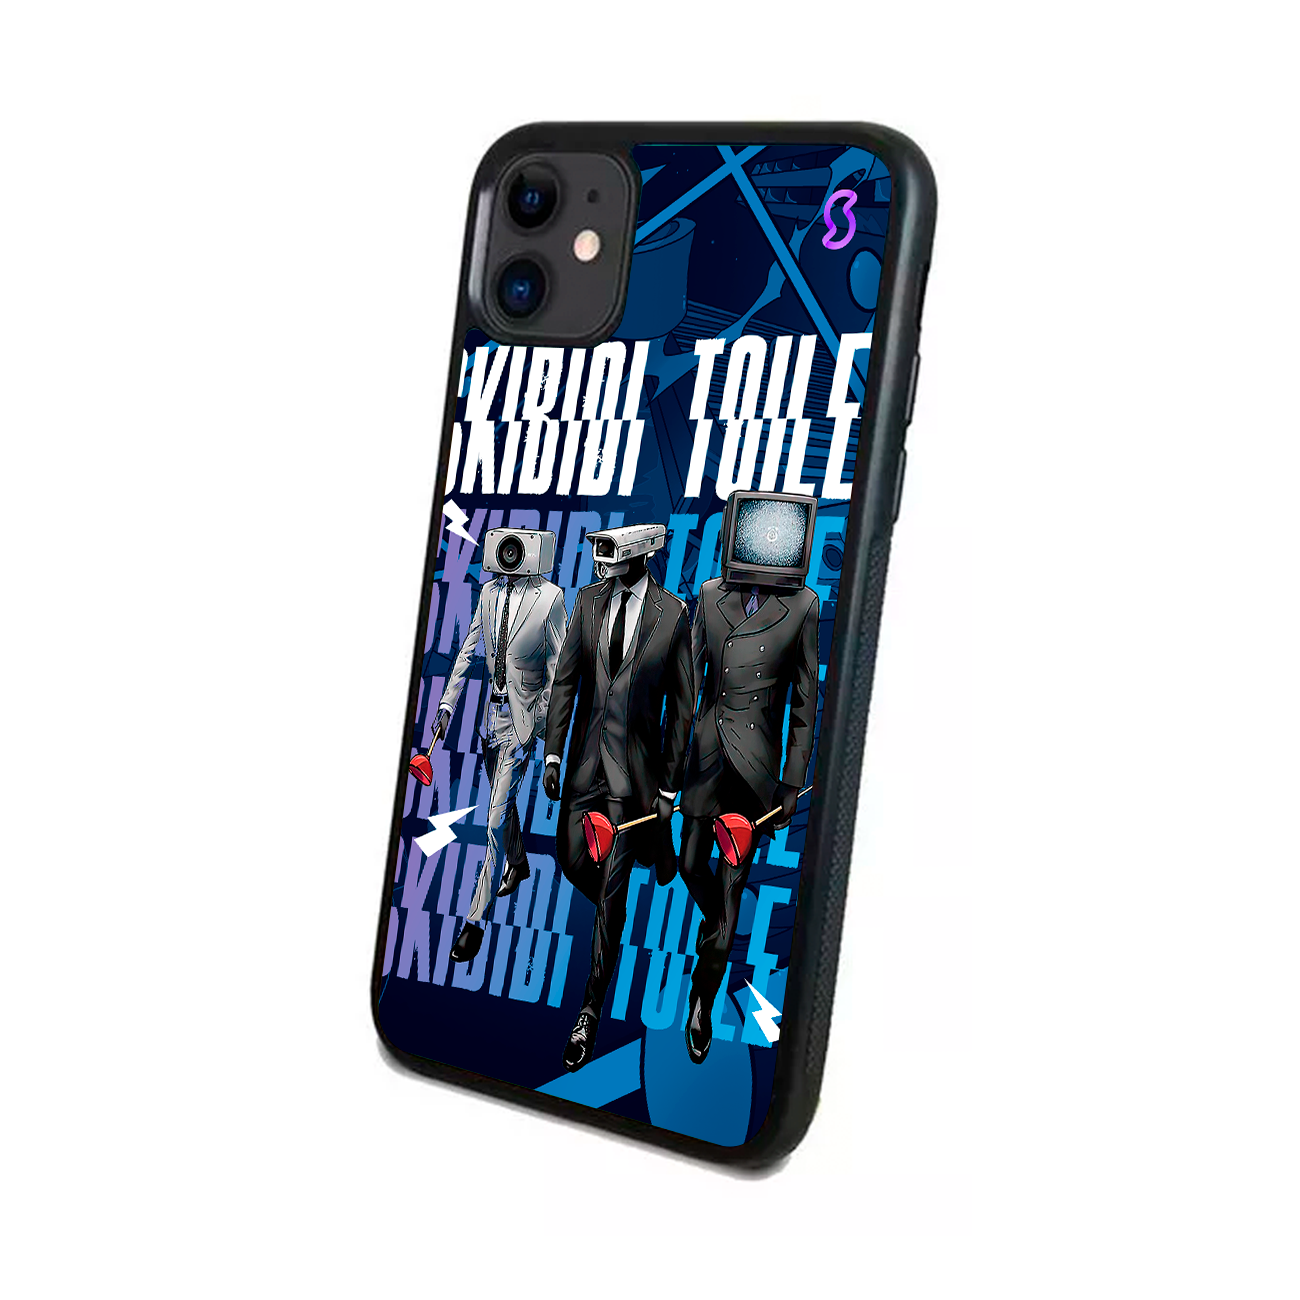 Sublimated cell phone case "Skibidi Toilets"